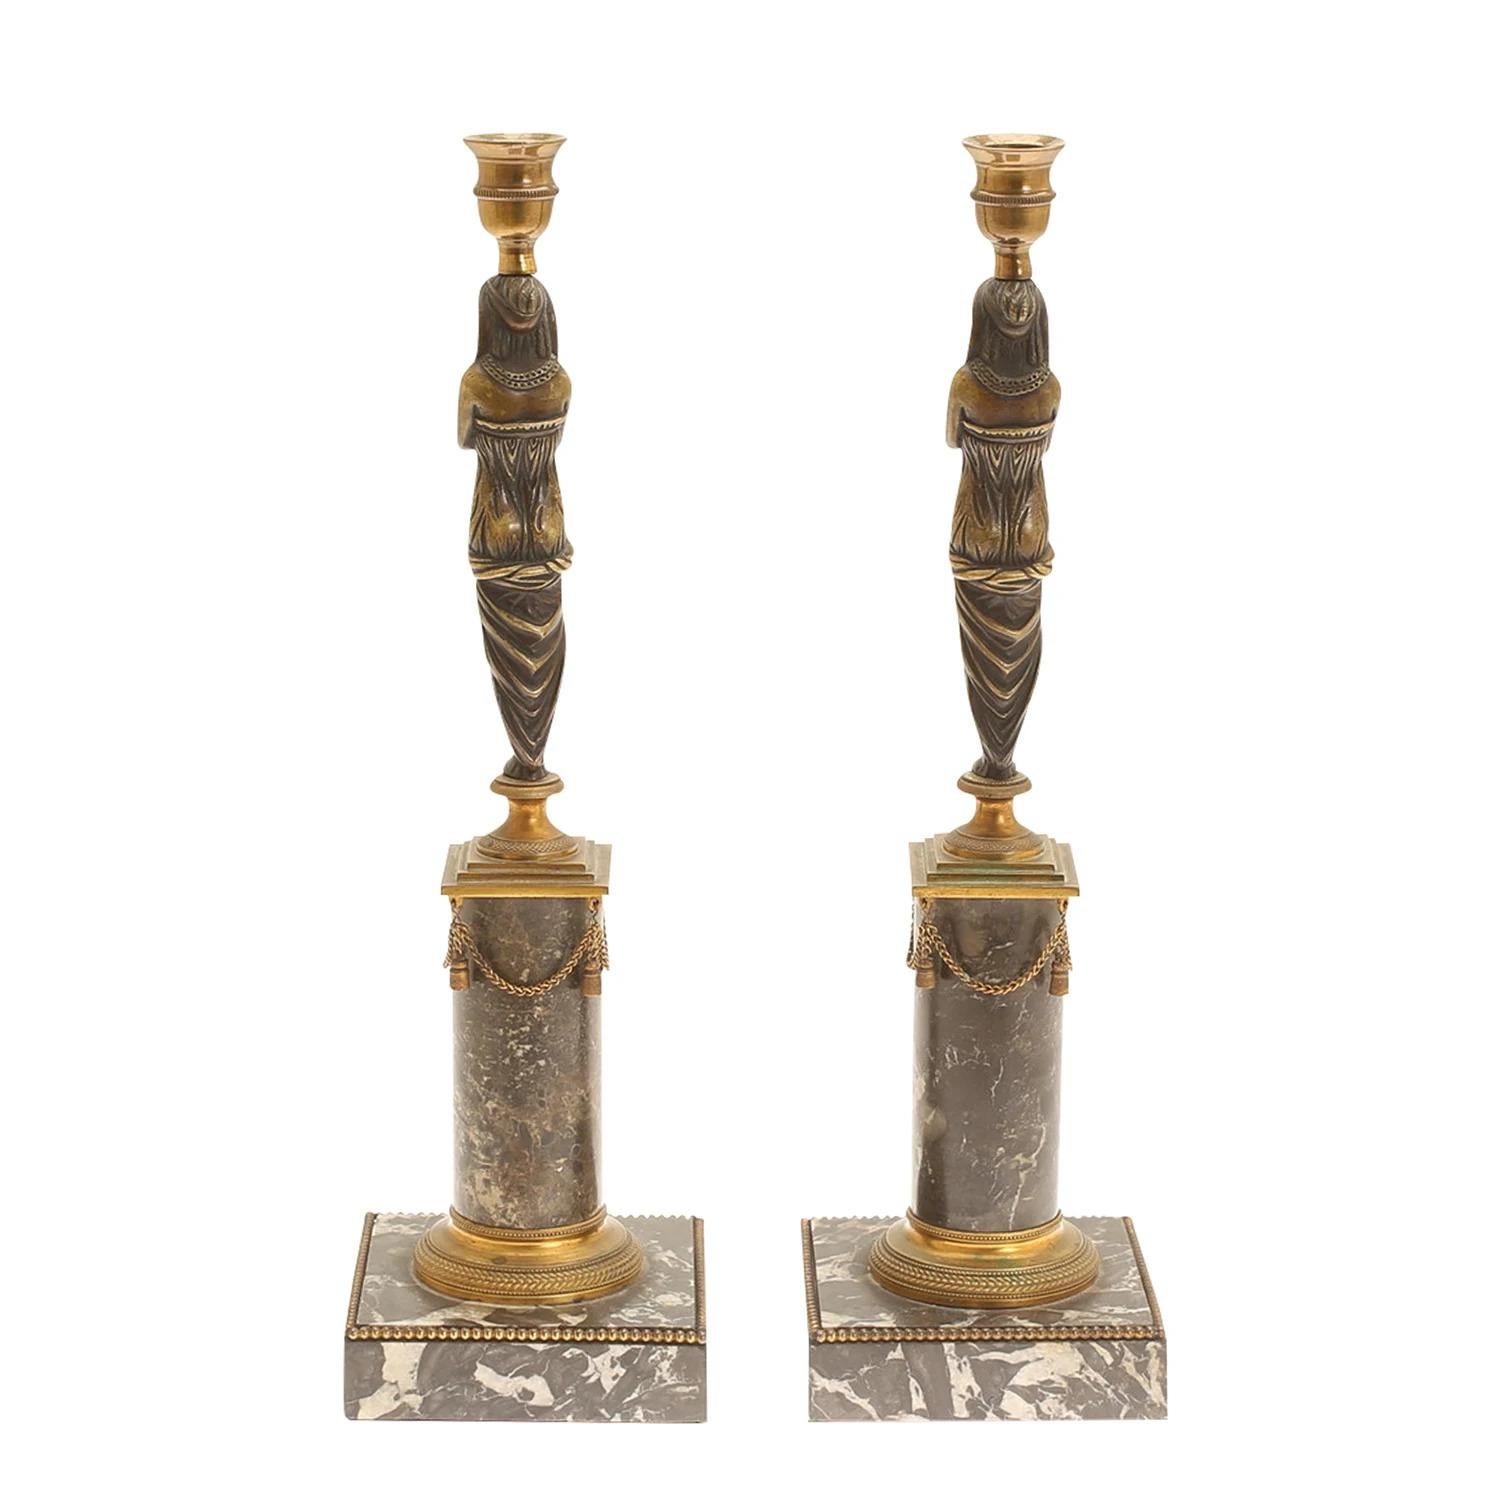 A gold, antique French pair of Egyptian women figure candle holders made of handcrafted marble and patinated bronze, in good condition. The candle sticks are resting on an urn-shaped base. The particularized Parisian décor pieces represent the First